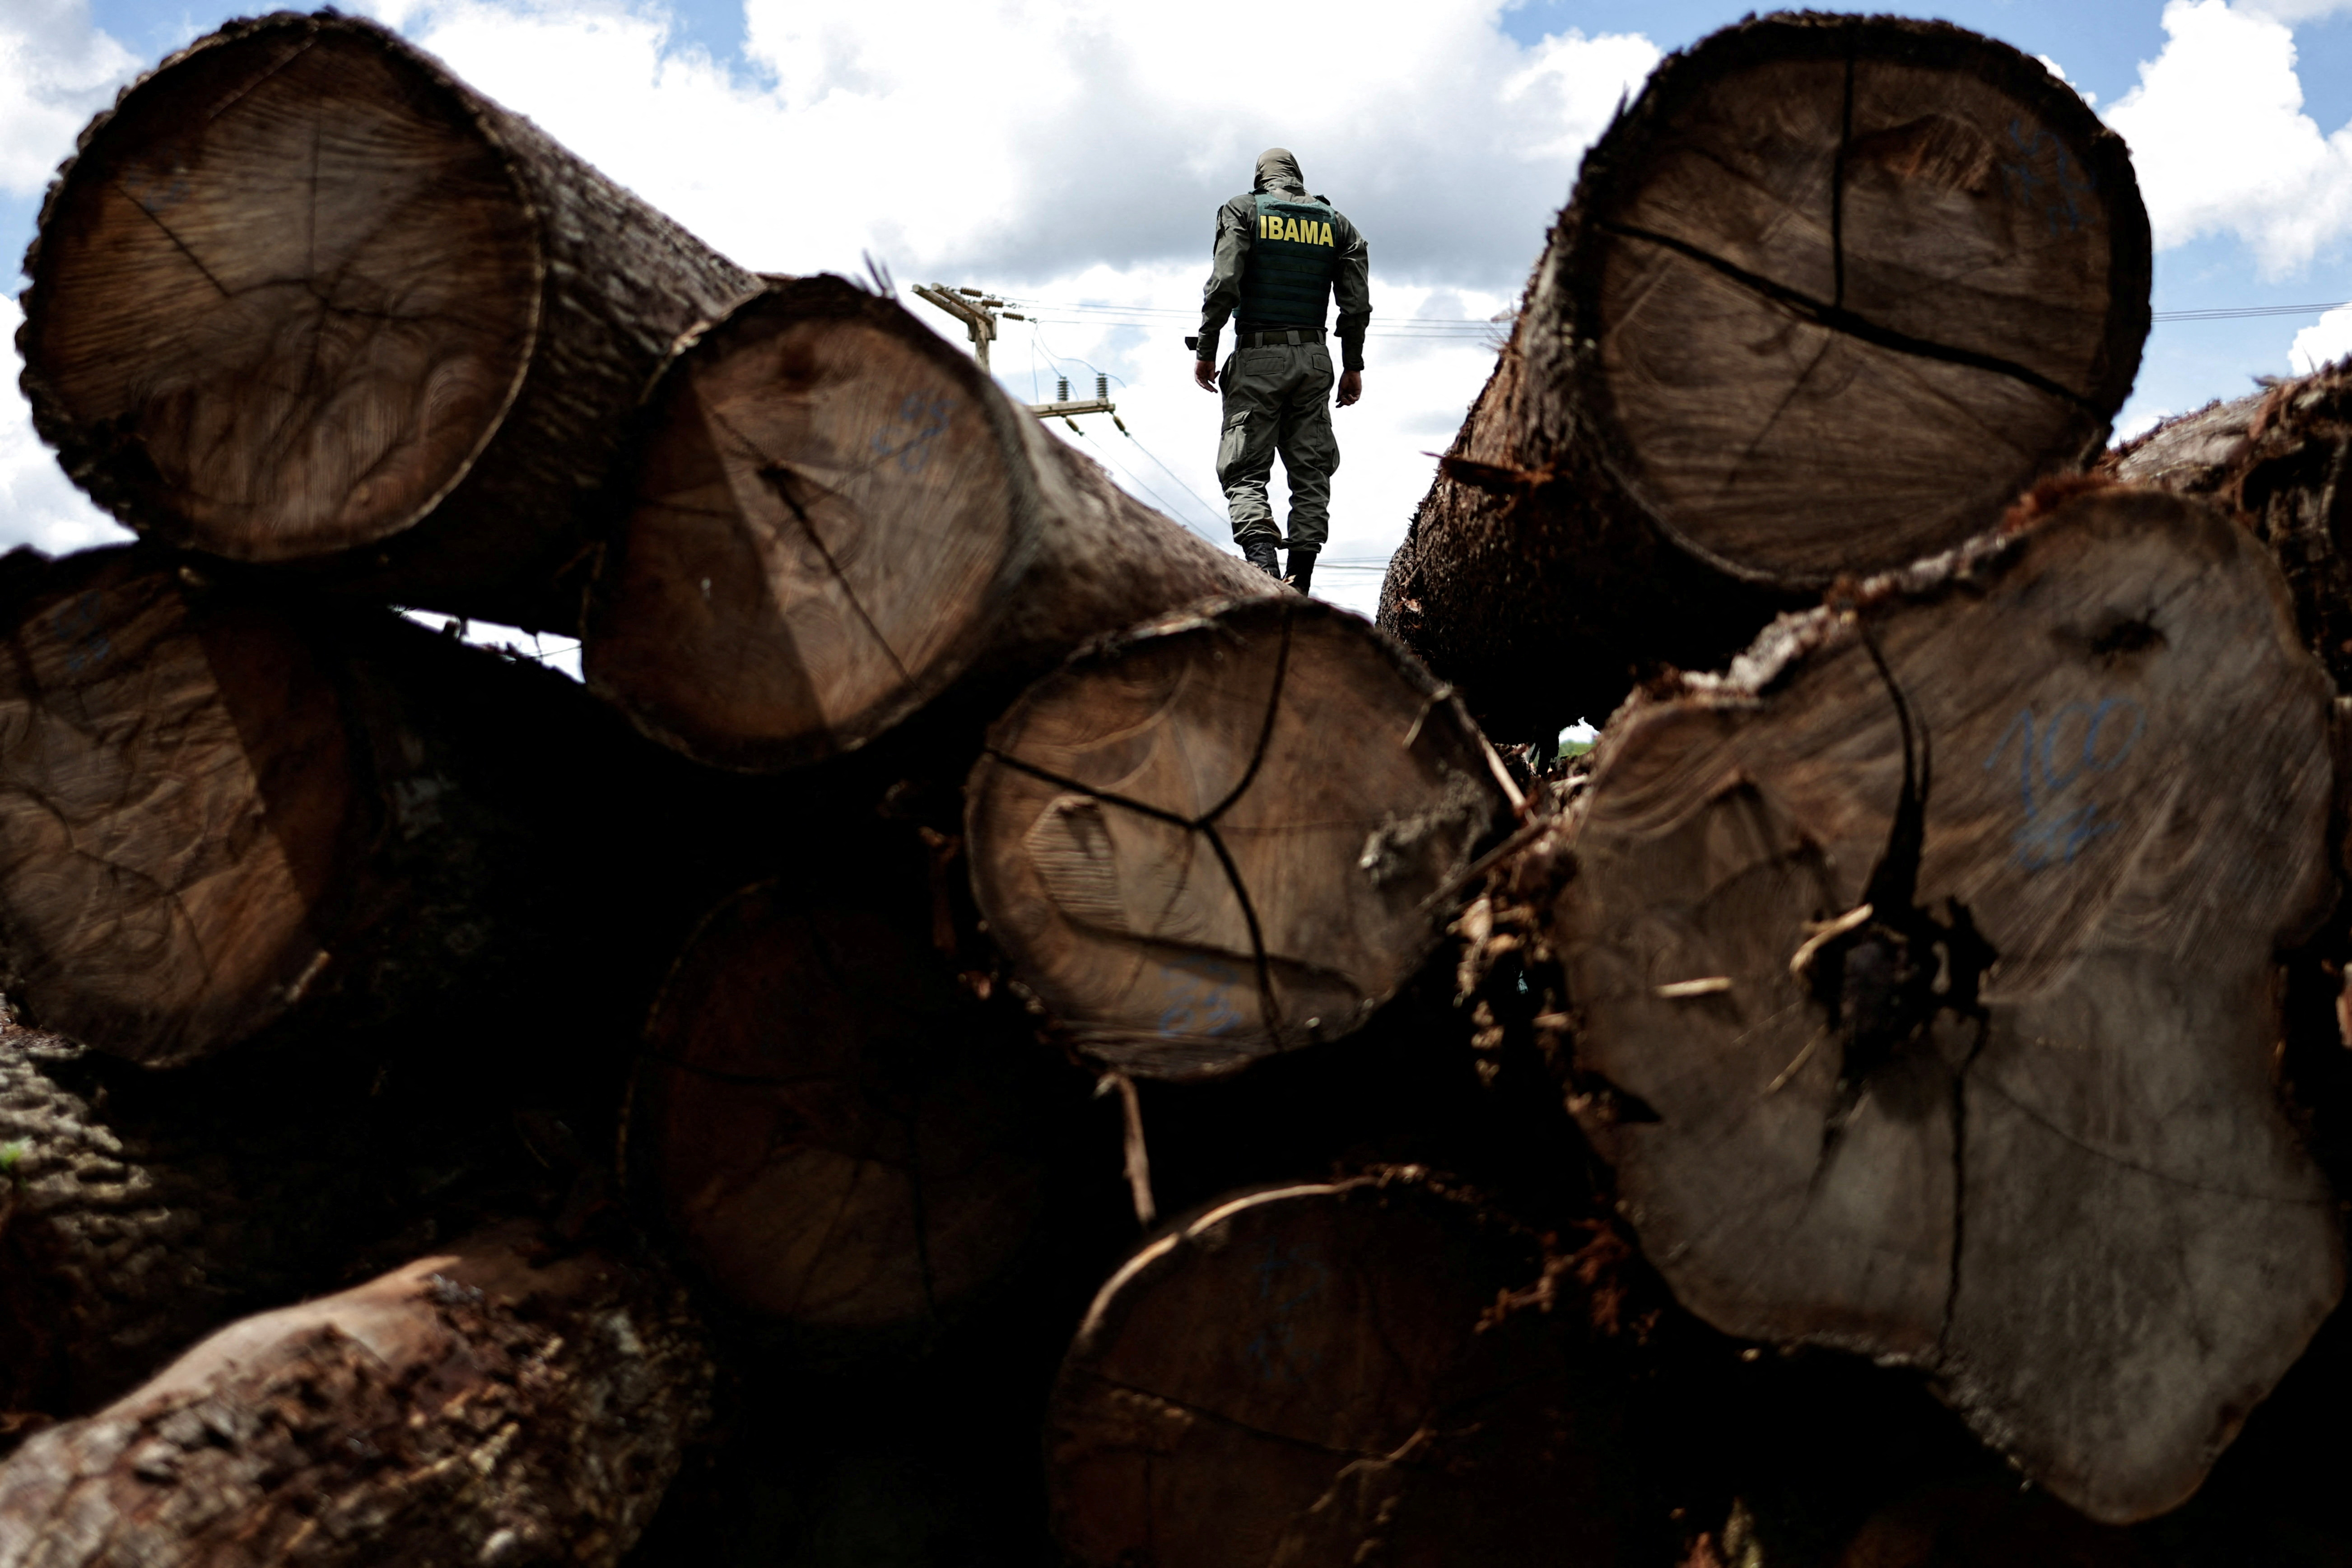 An agent of the Brazilian Institute for the Environment and Renewable Natural Resources (IBAMA) inspects a tree extracted from the Amazon